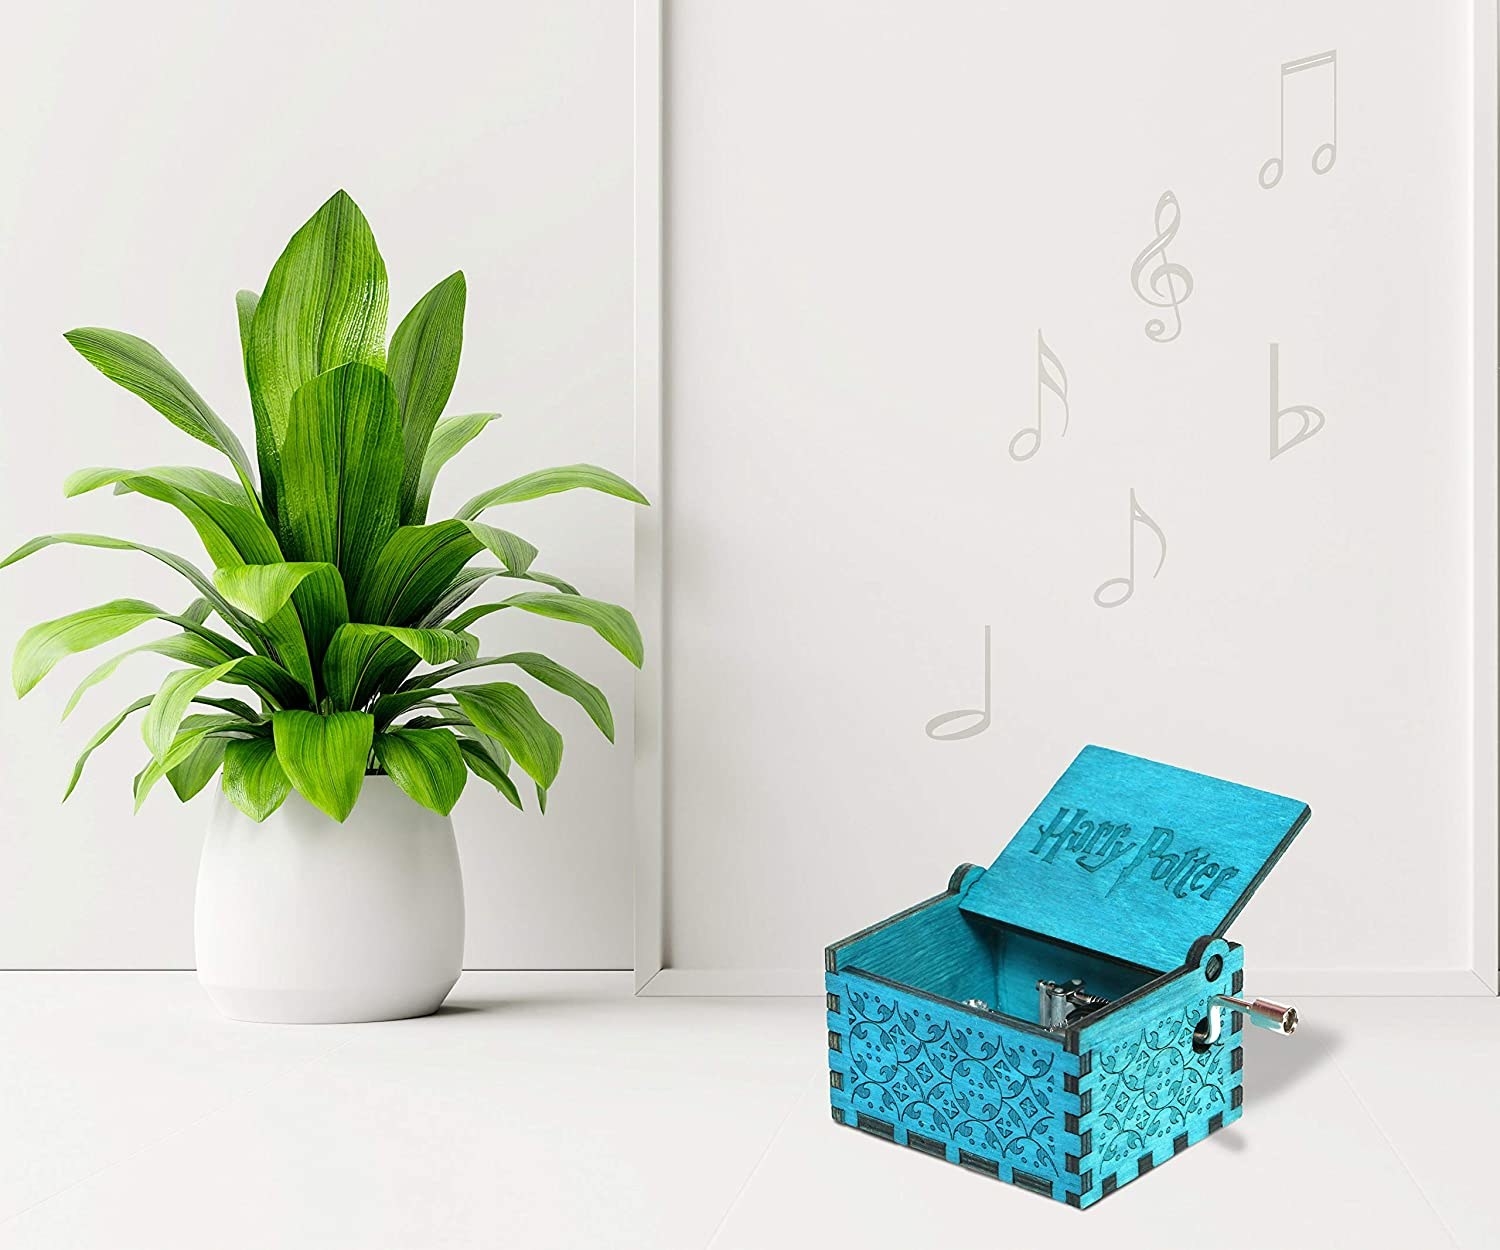 A music box on a table next to a plant